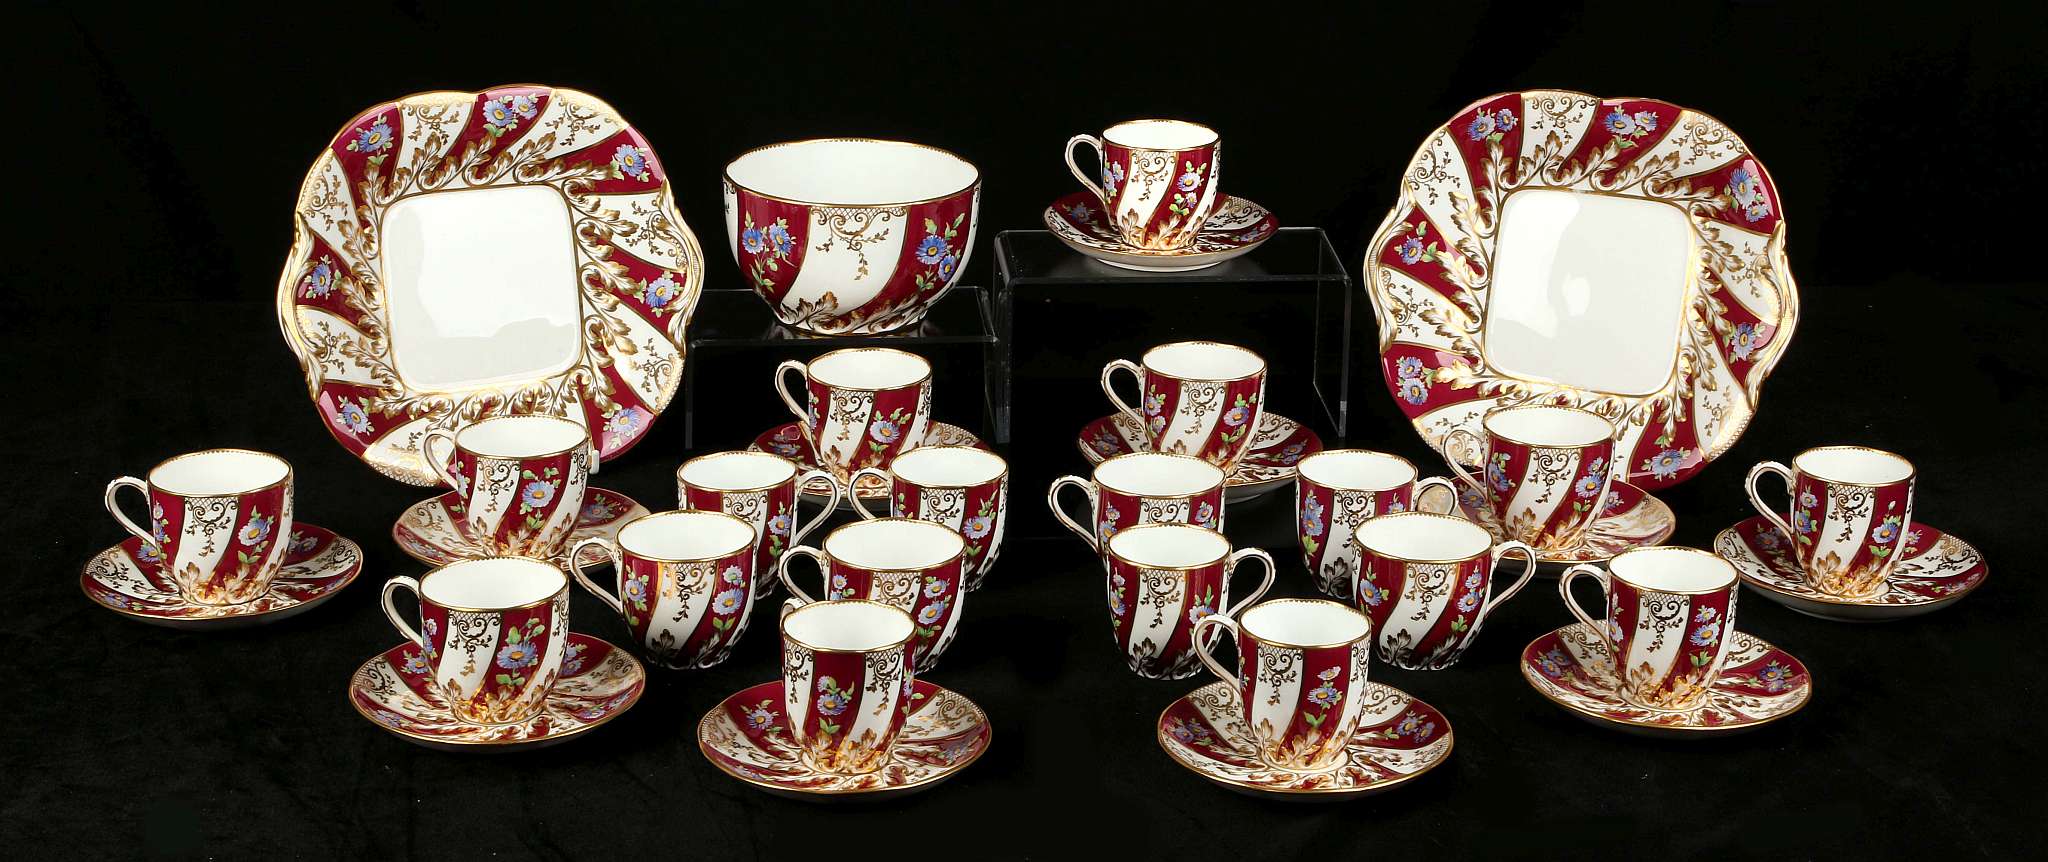 AN ENGLISH PORCELAIN TEA AND COFFEE SERVICE, mid 19th century, decorated with flowers on a crimson